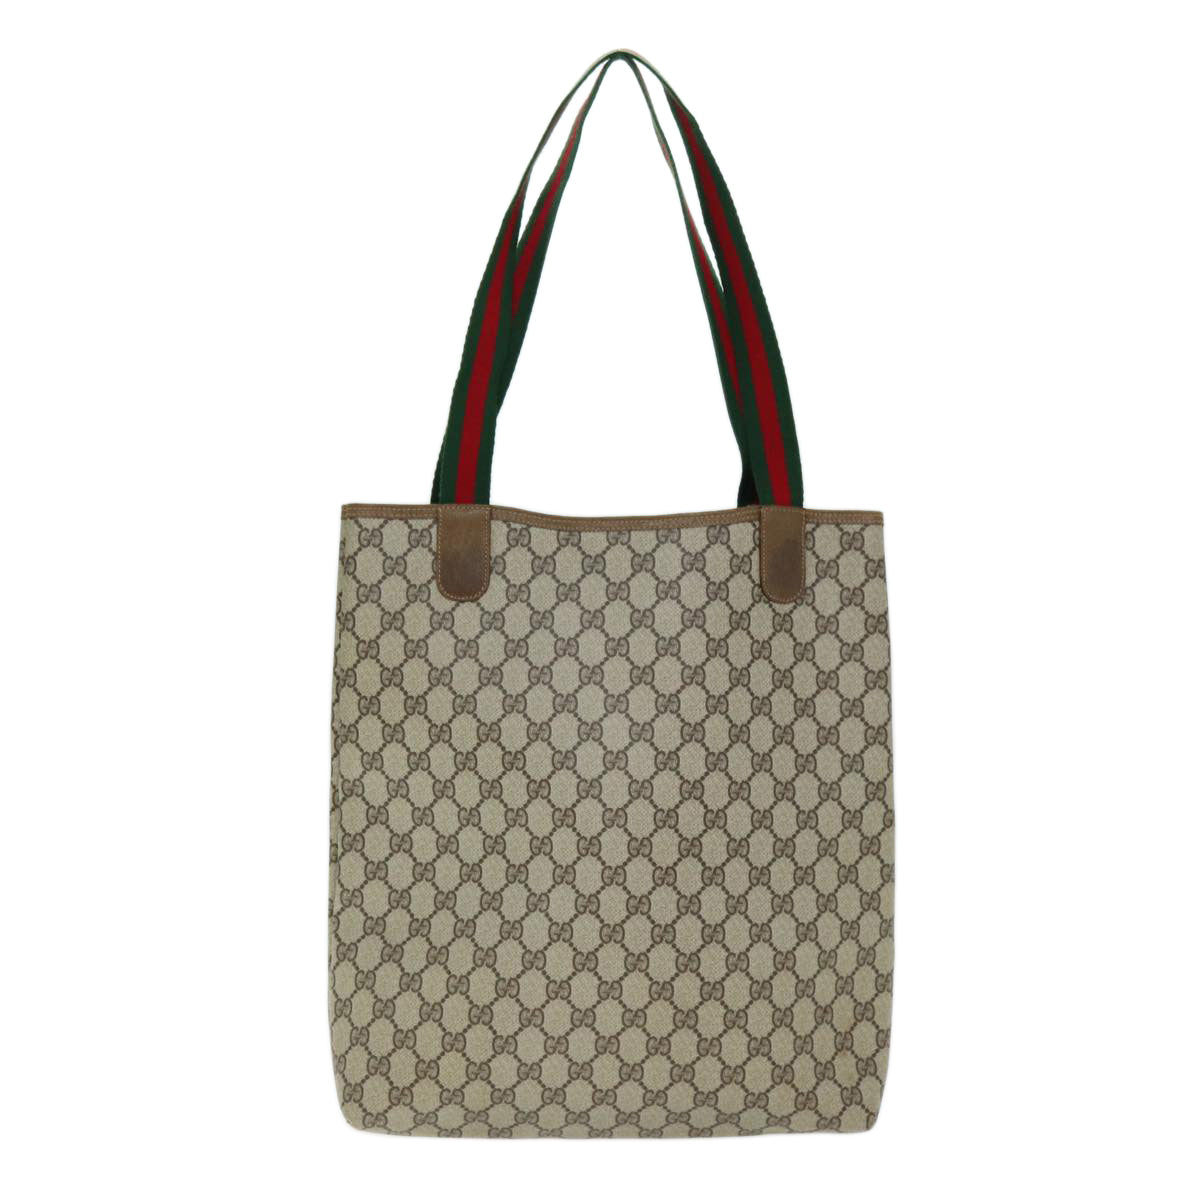 GUCCI GG Supreme Web Sherry Line Tote Bag PVC Beige Red 40 02 003 Auth yk12529 - 0